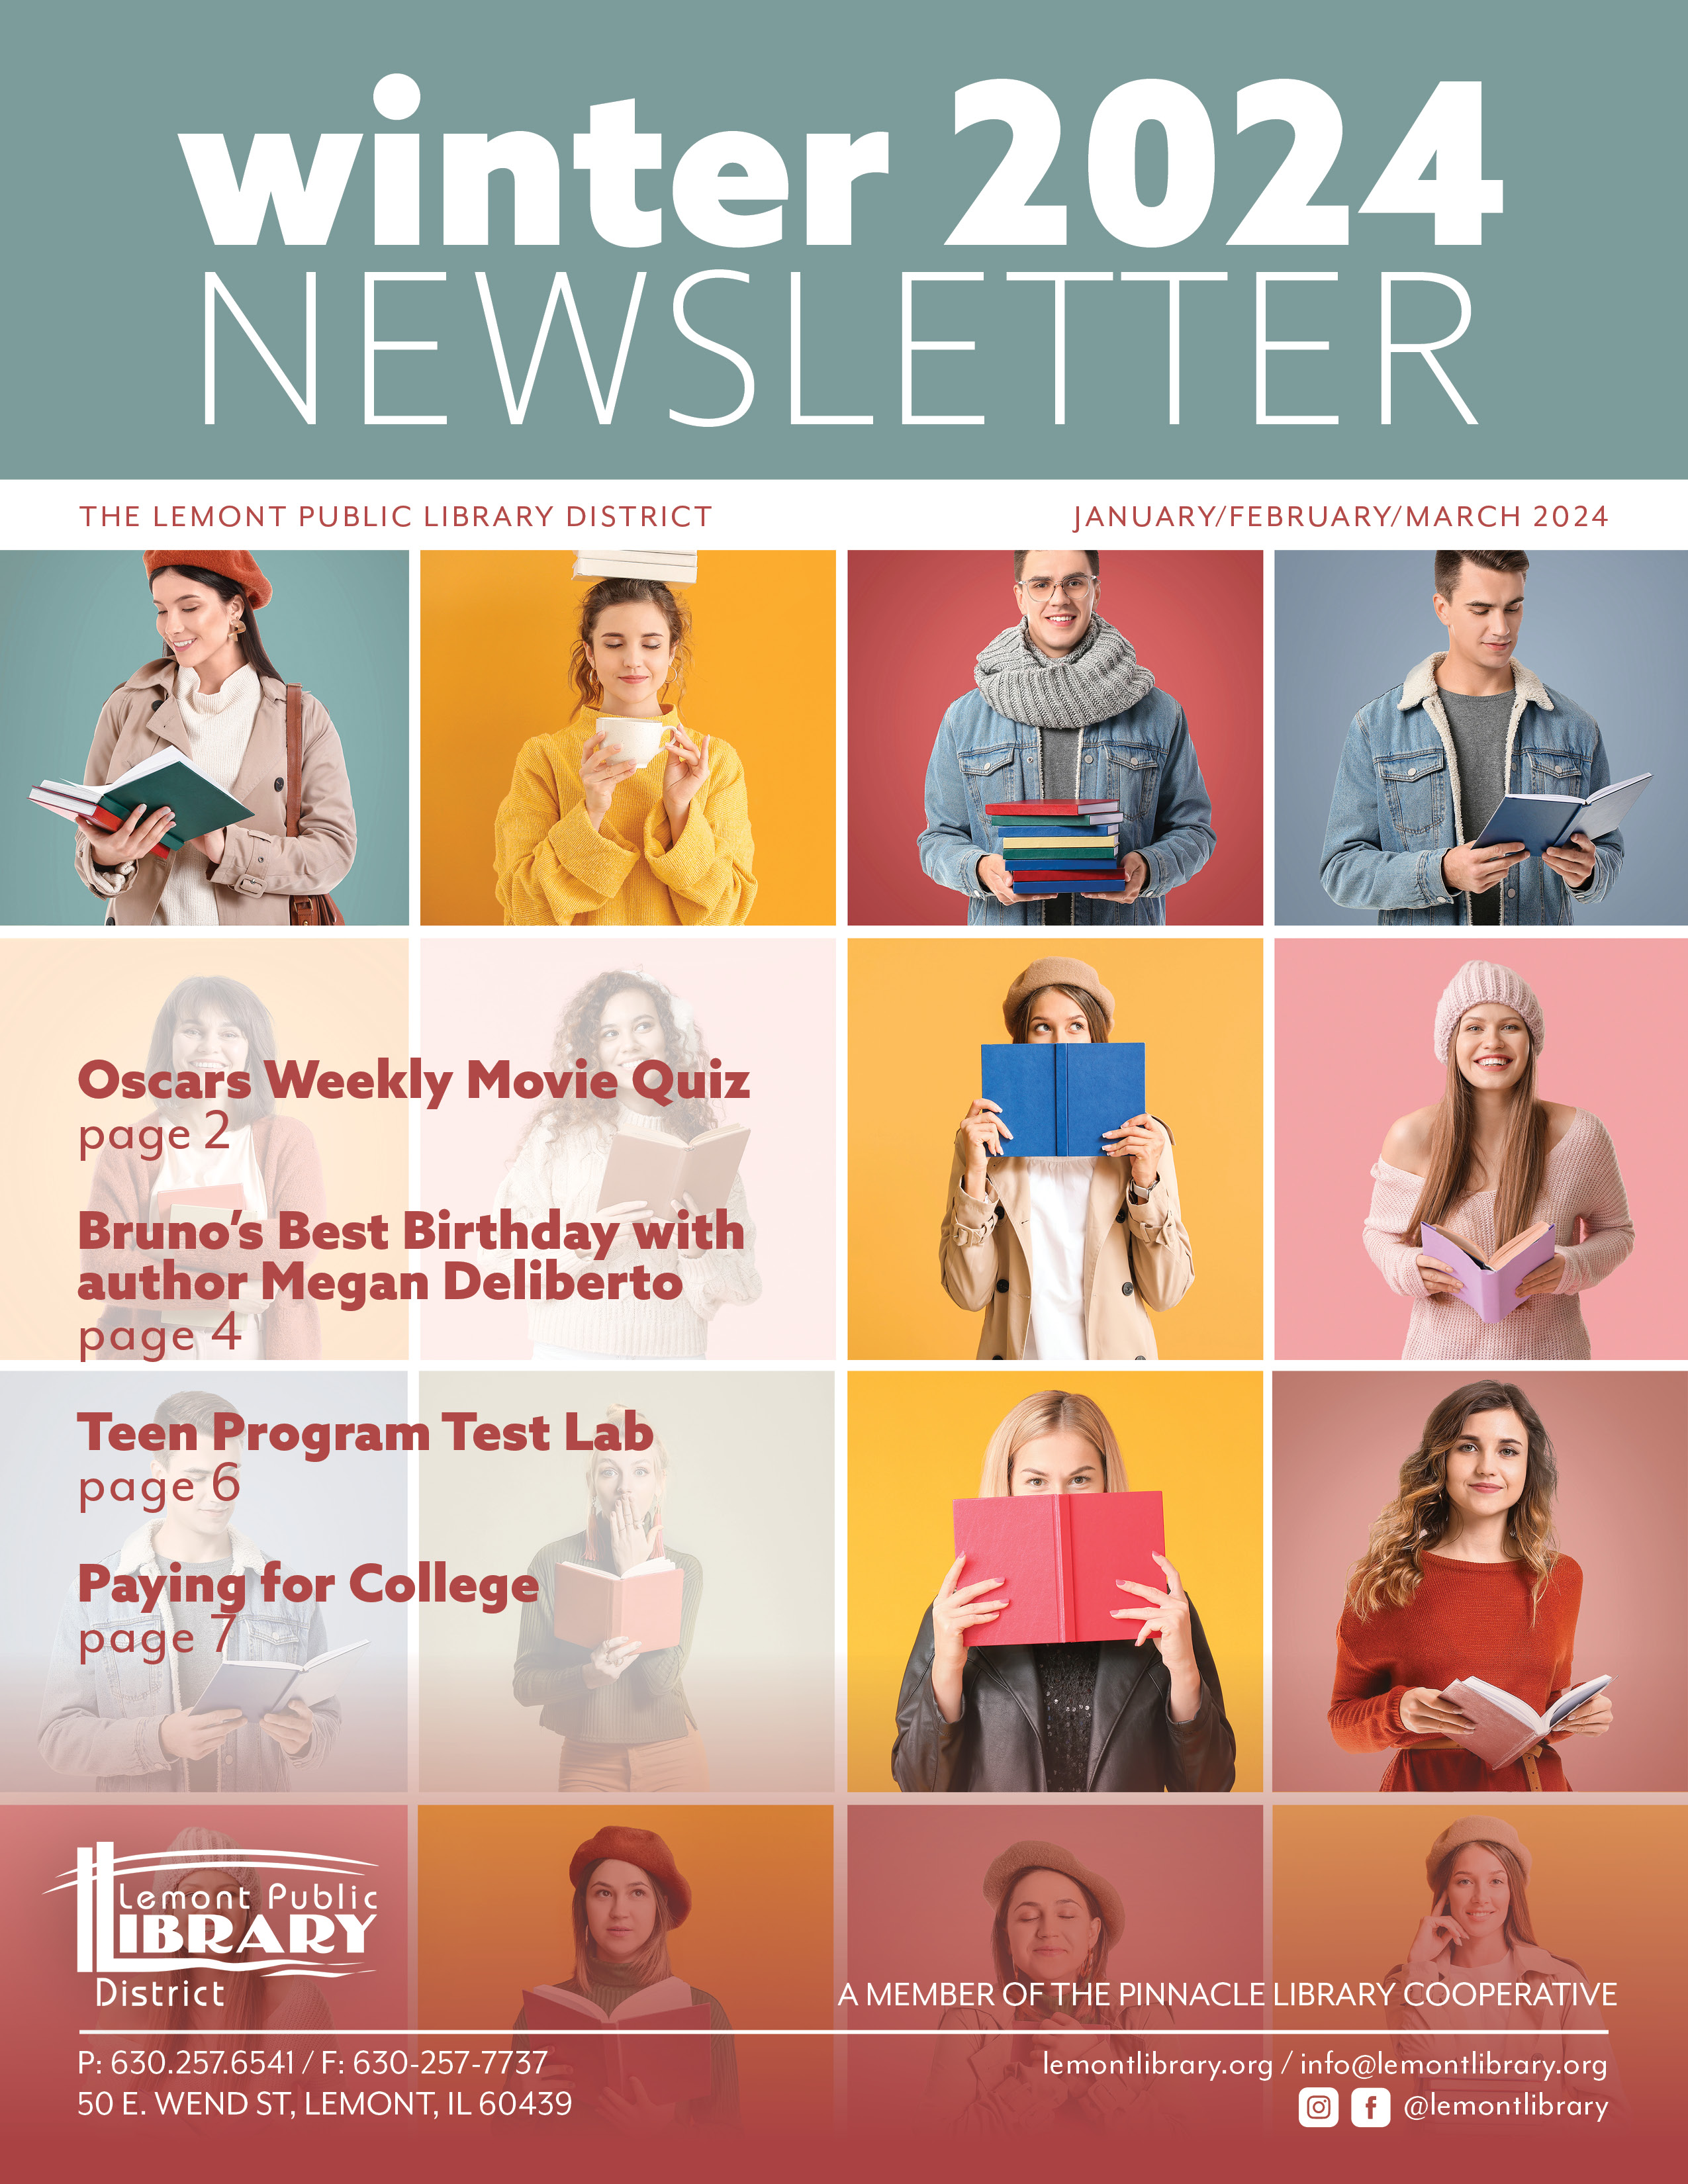 2024 Winter Newsletter cover grid of people holding books